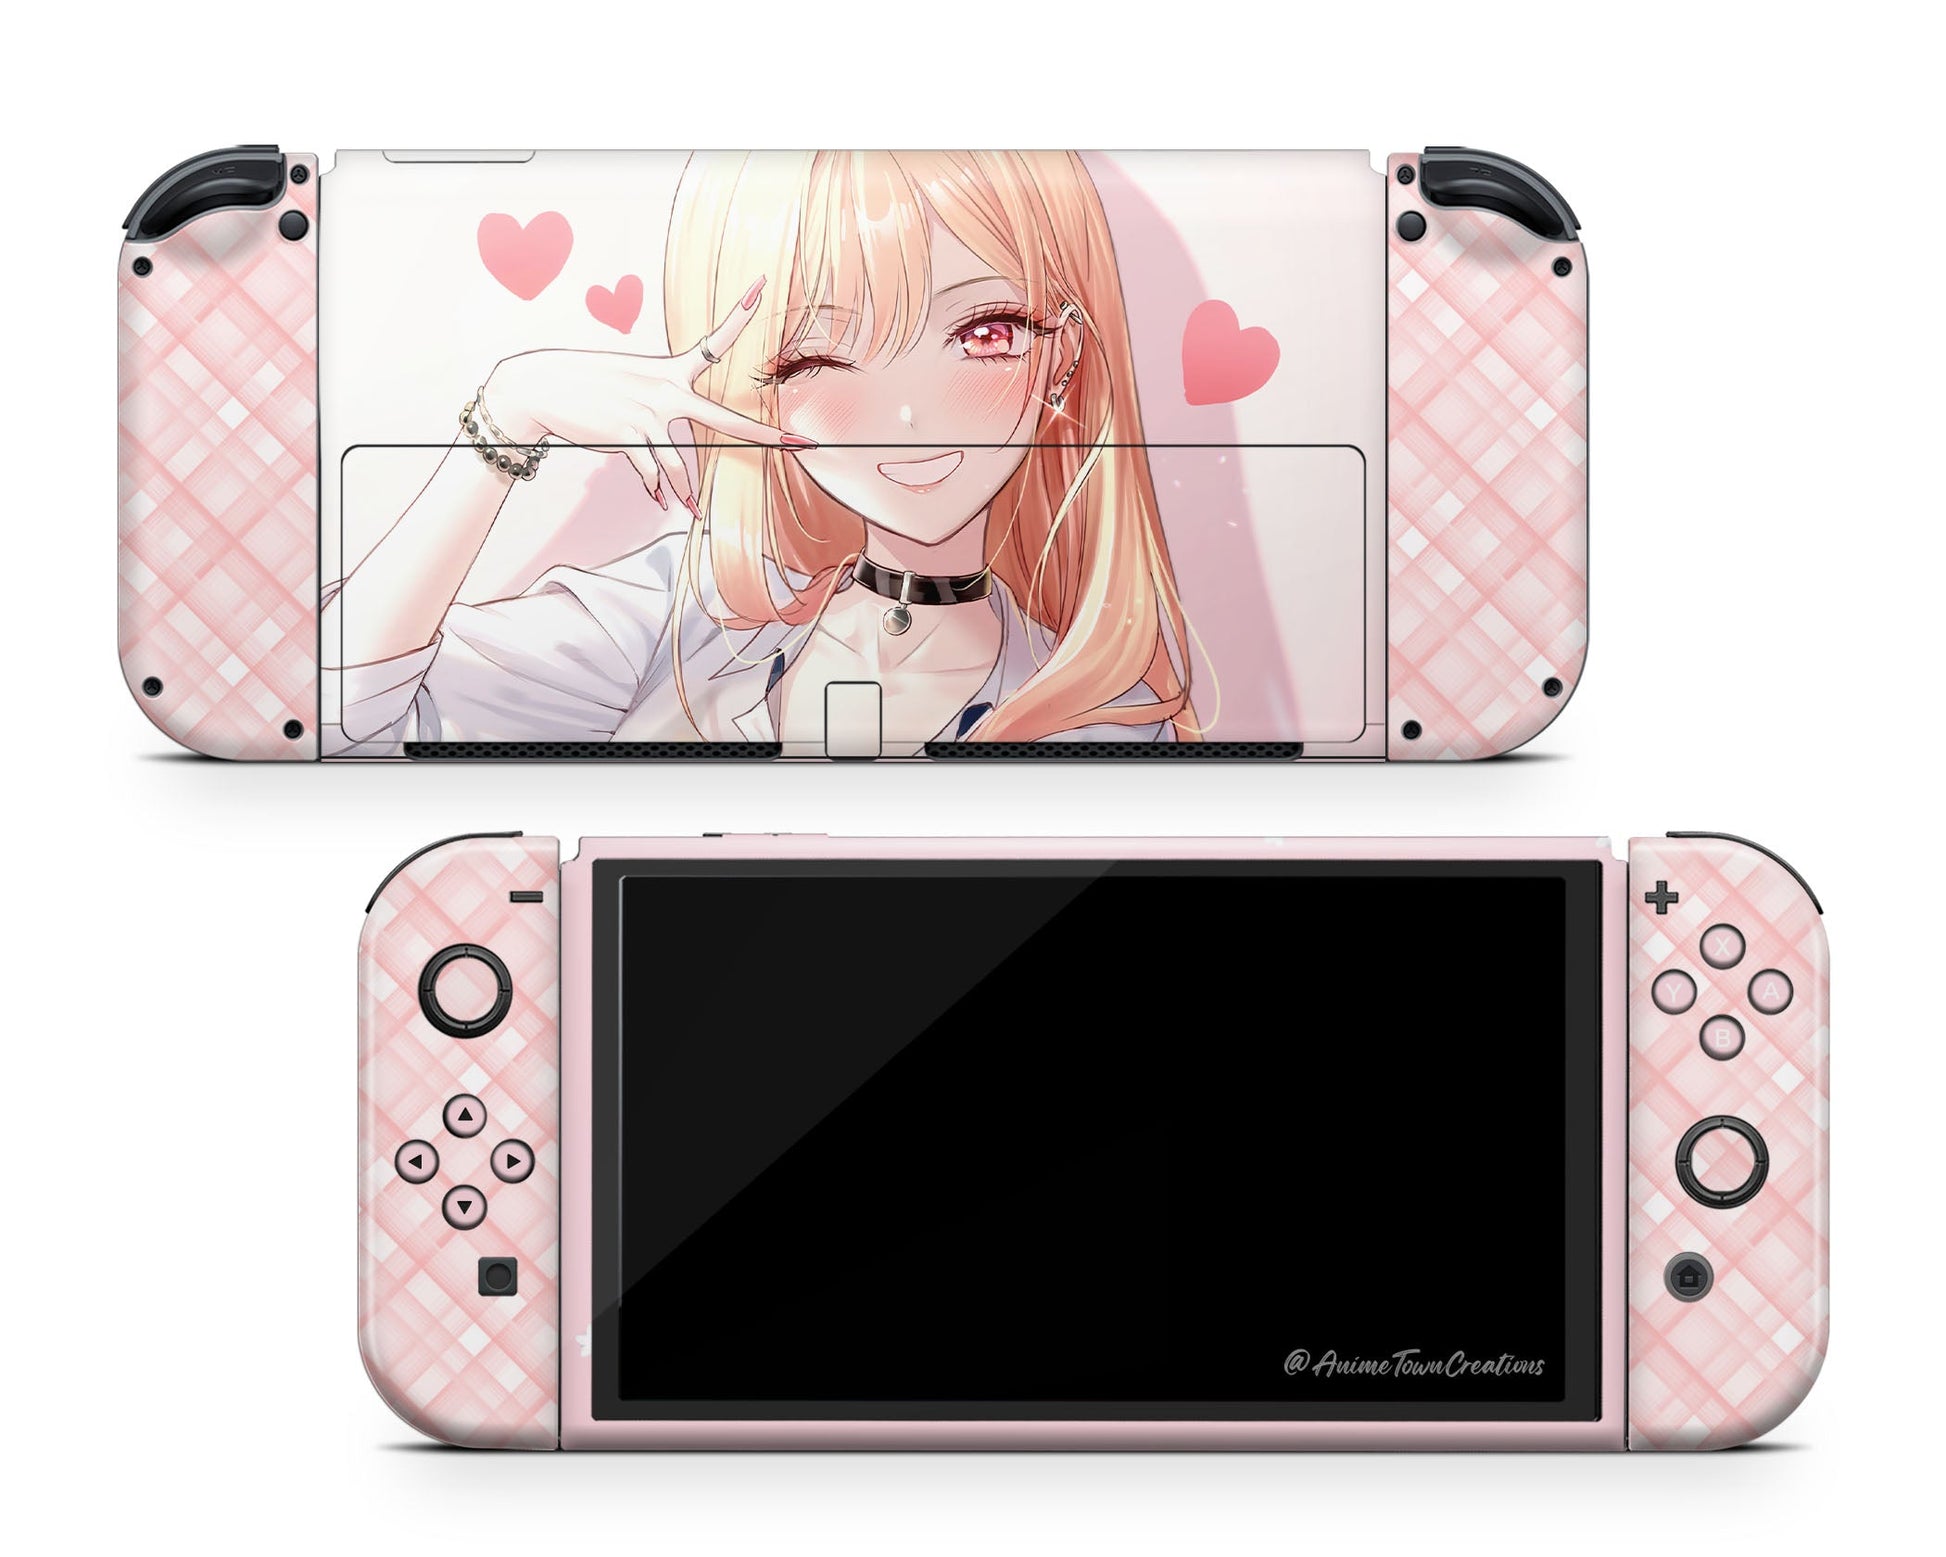 Anime Town Creations Nintendo Switch OLED My Dress up Darling Marin Vinyl +Tempered Glass Skins - Anime My Dress Up Darling Switch OLED Skin